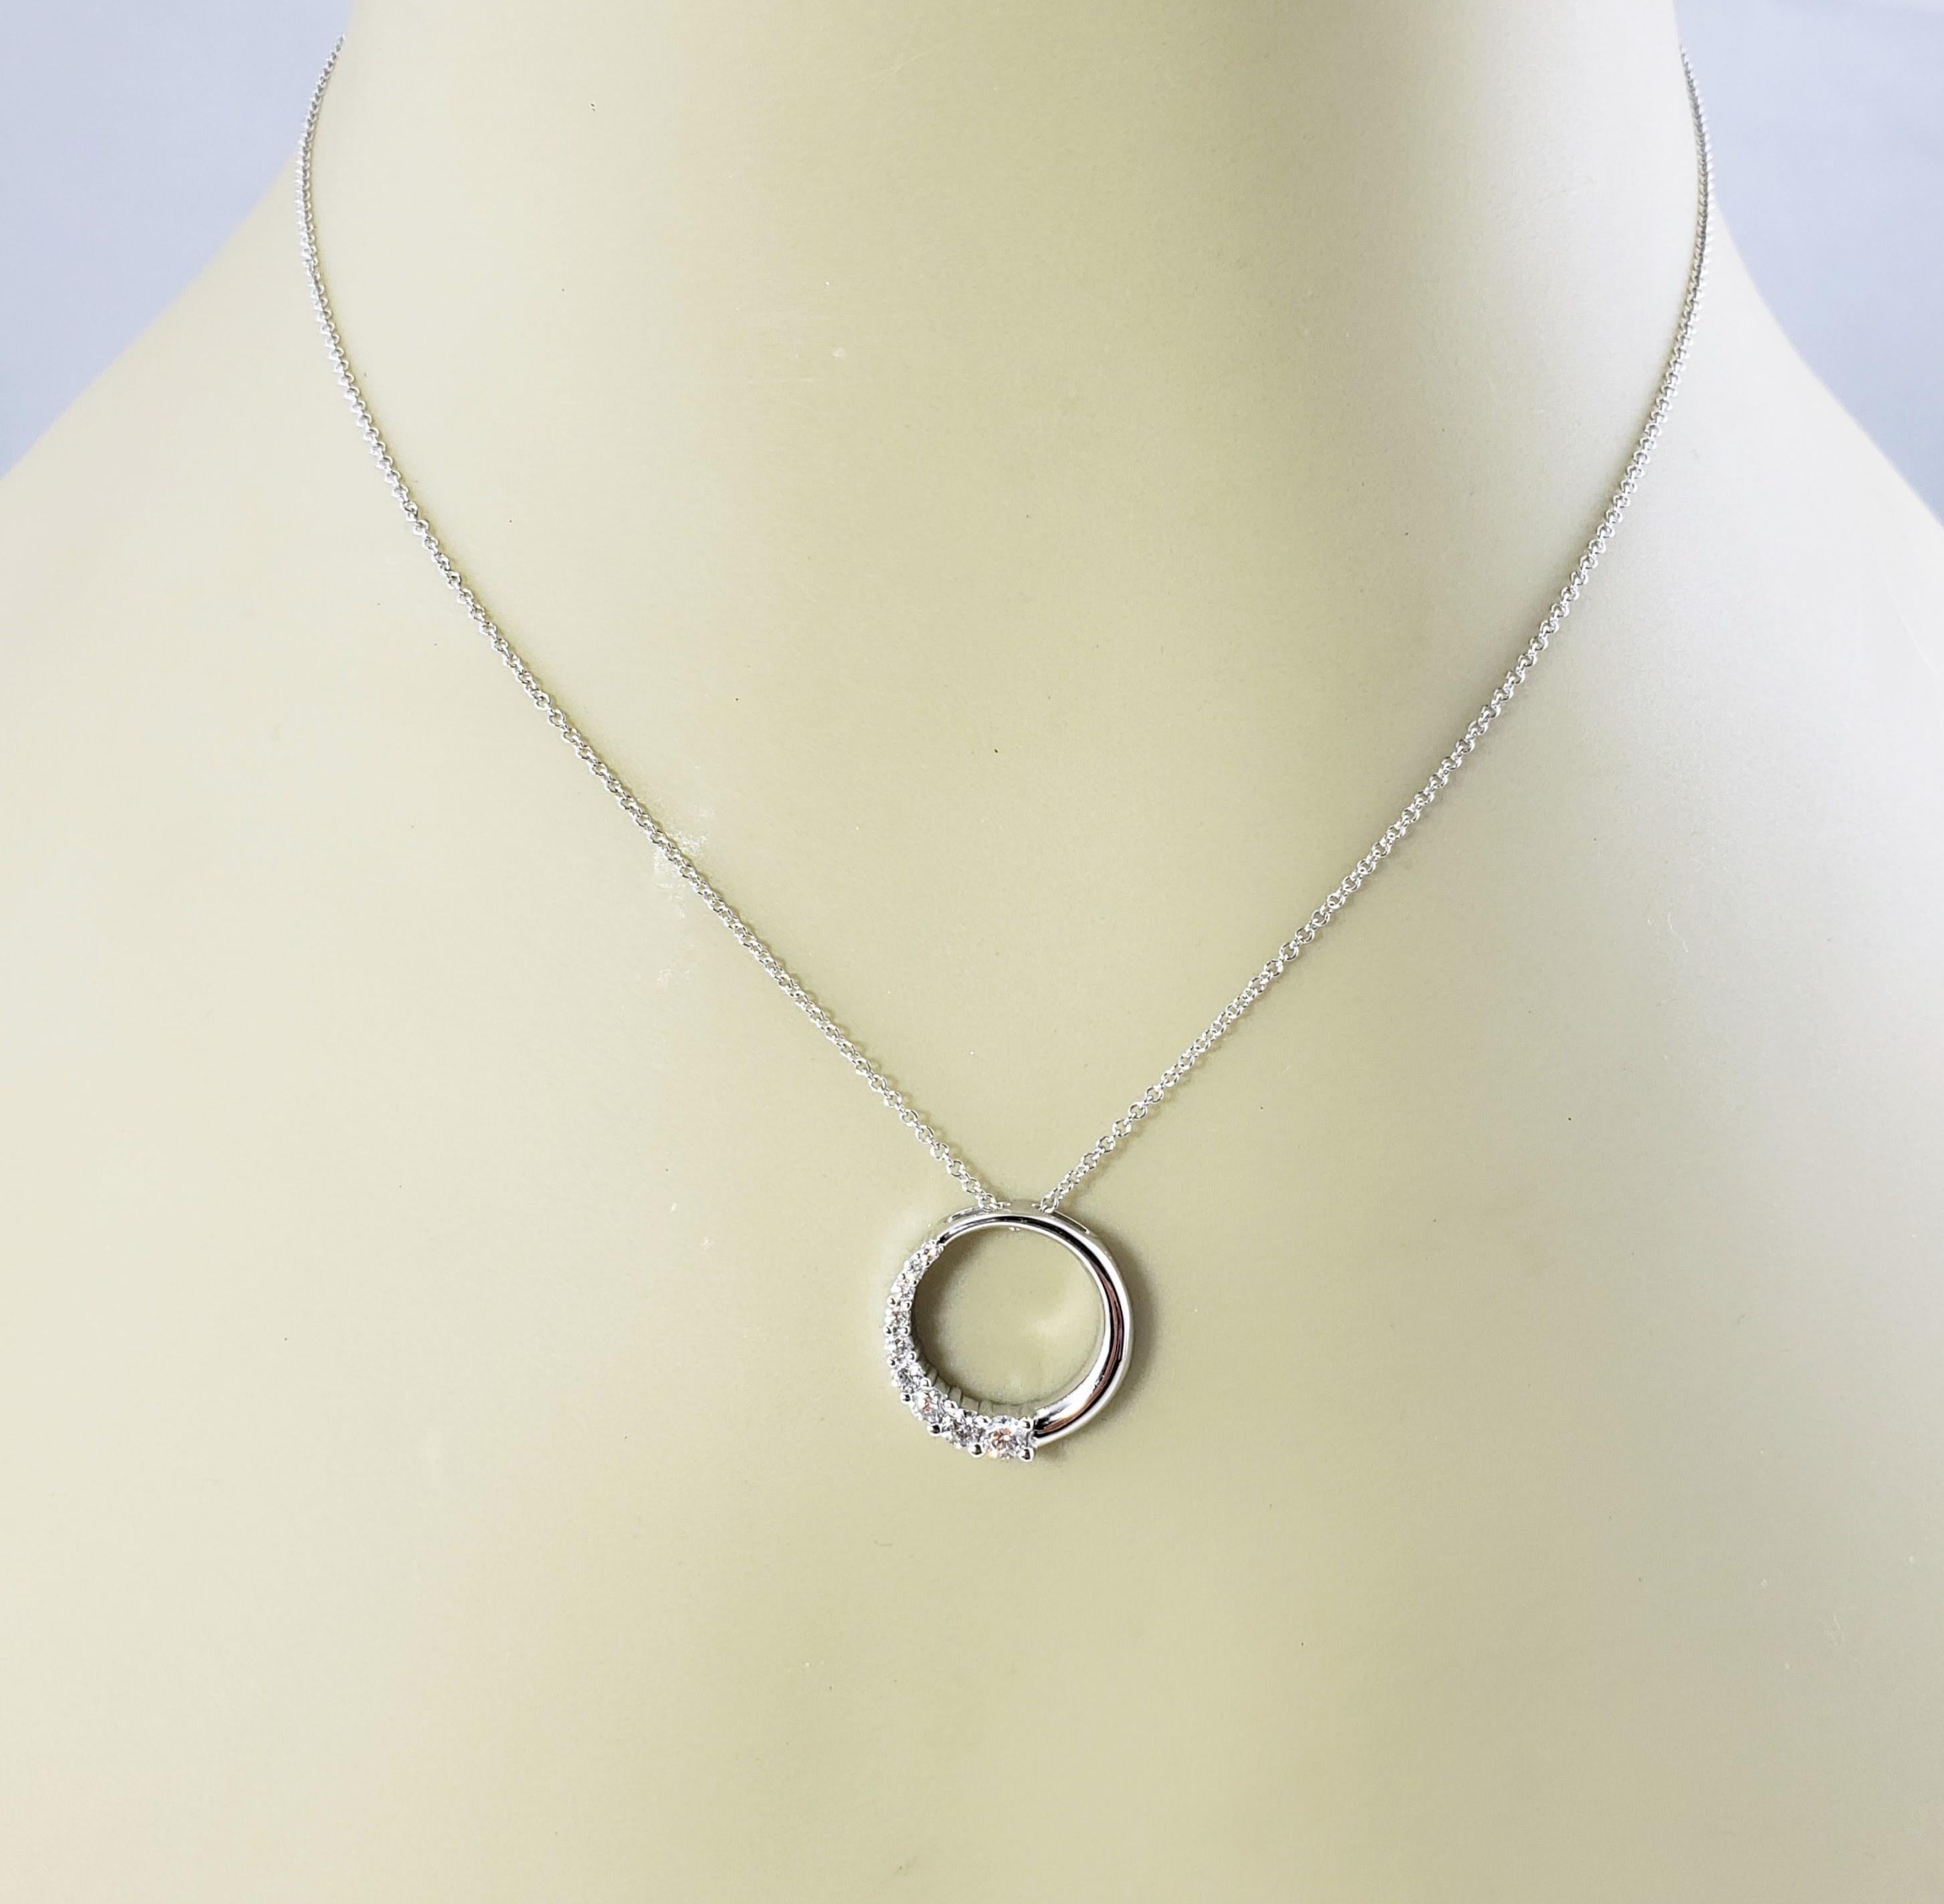 14 Karat White Gold and Diamond Circle Pendant Necklace For Sale 3